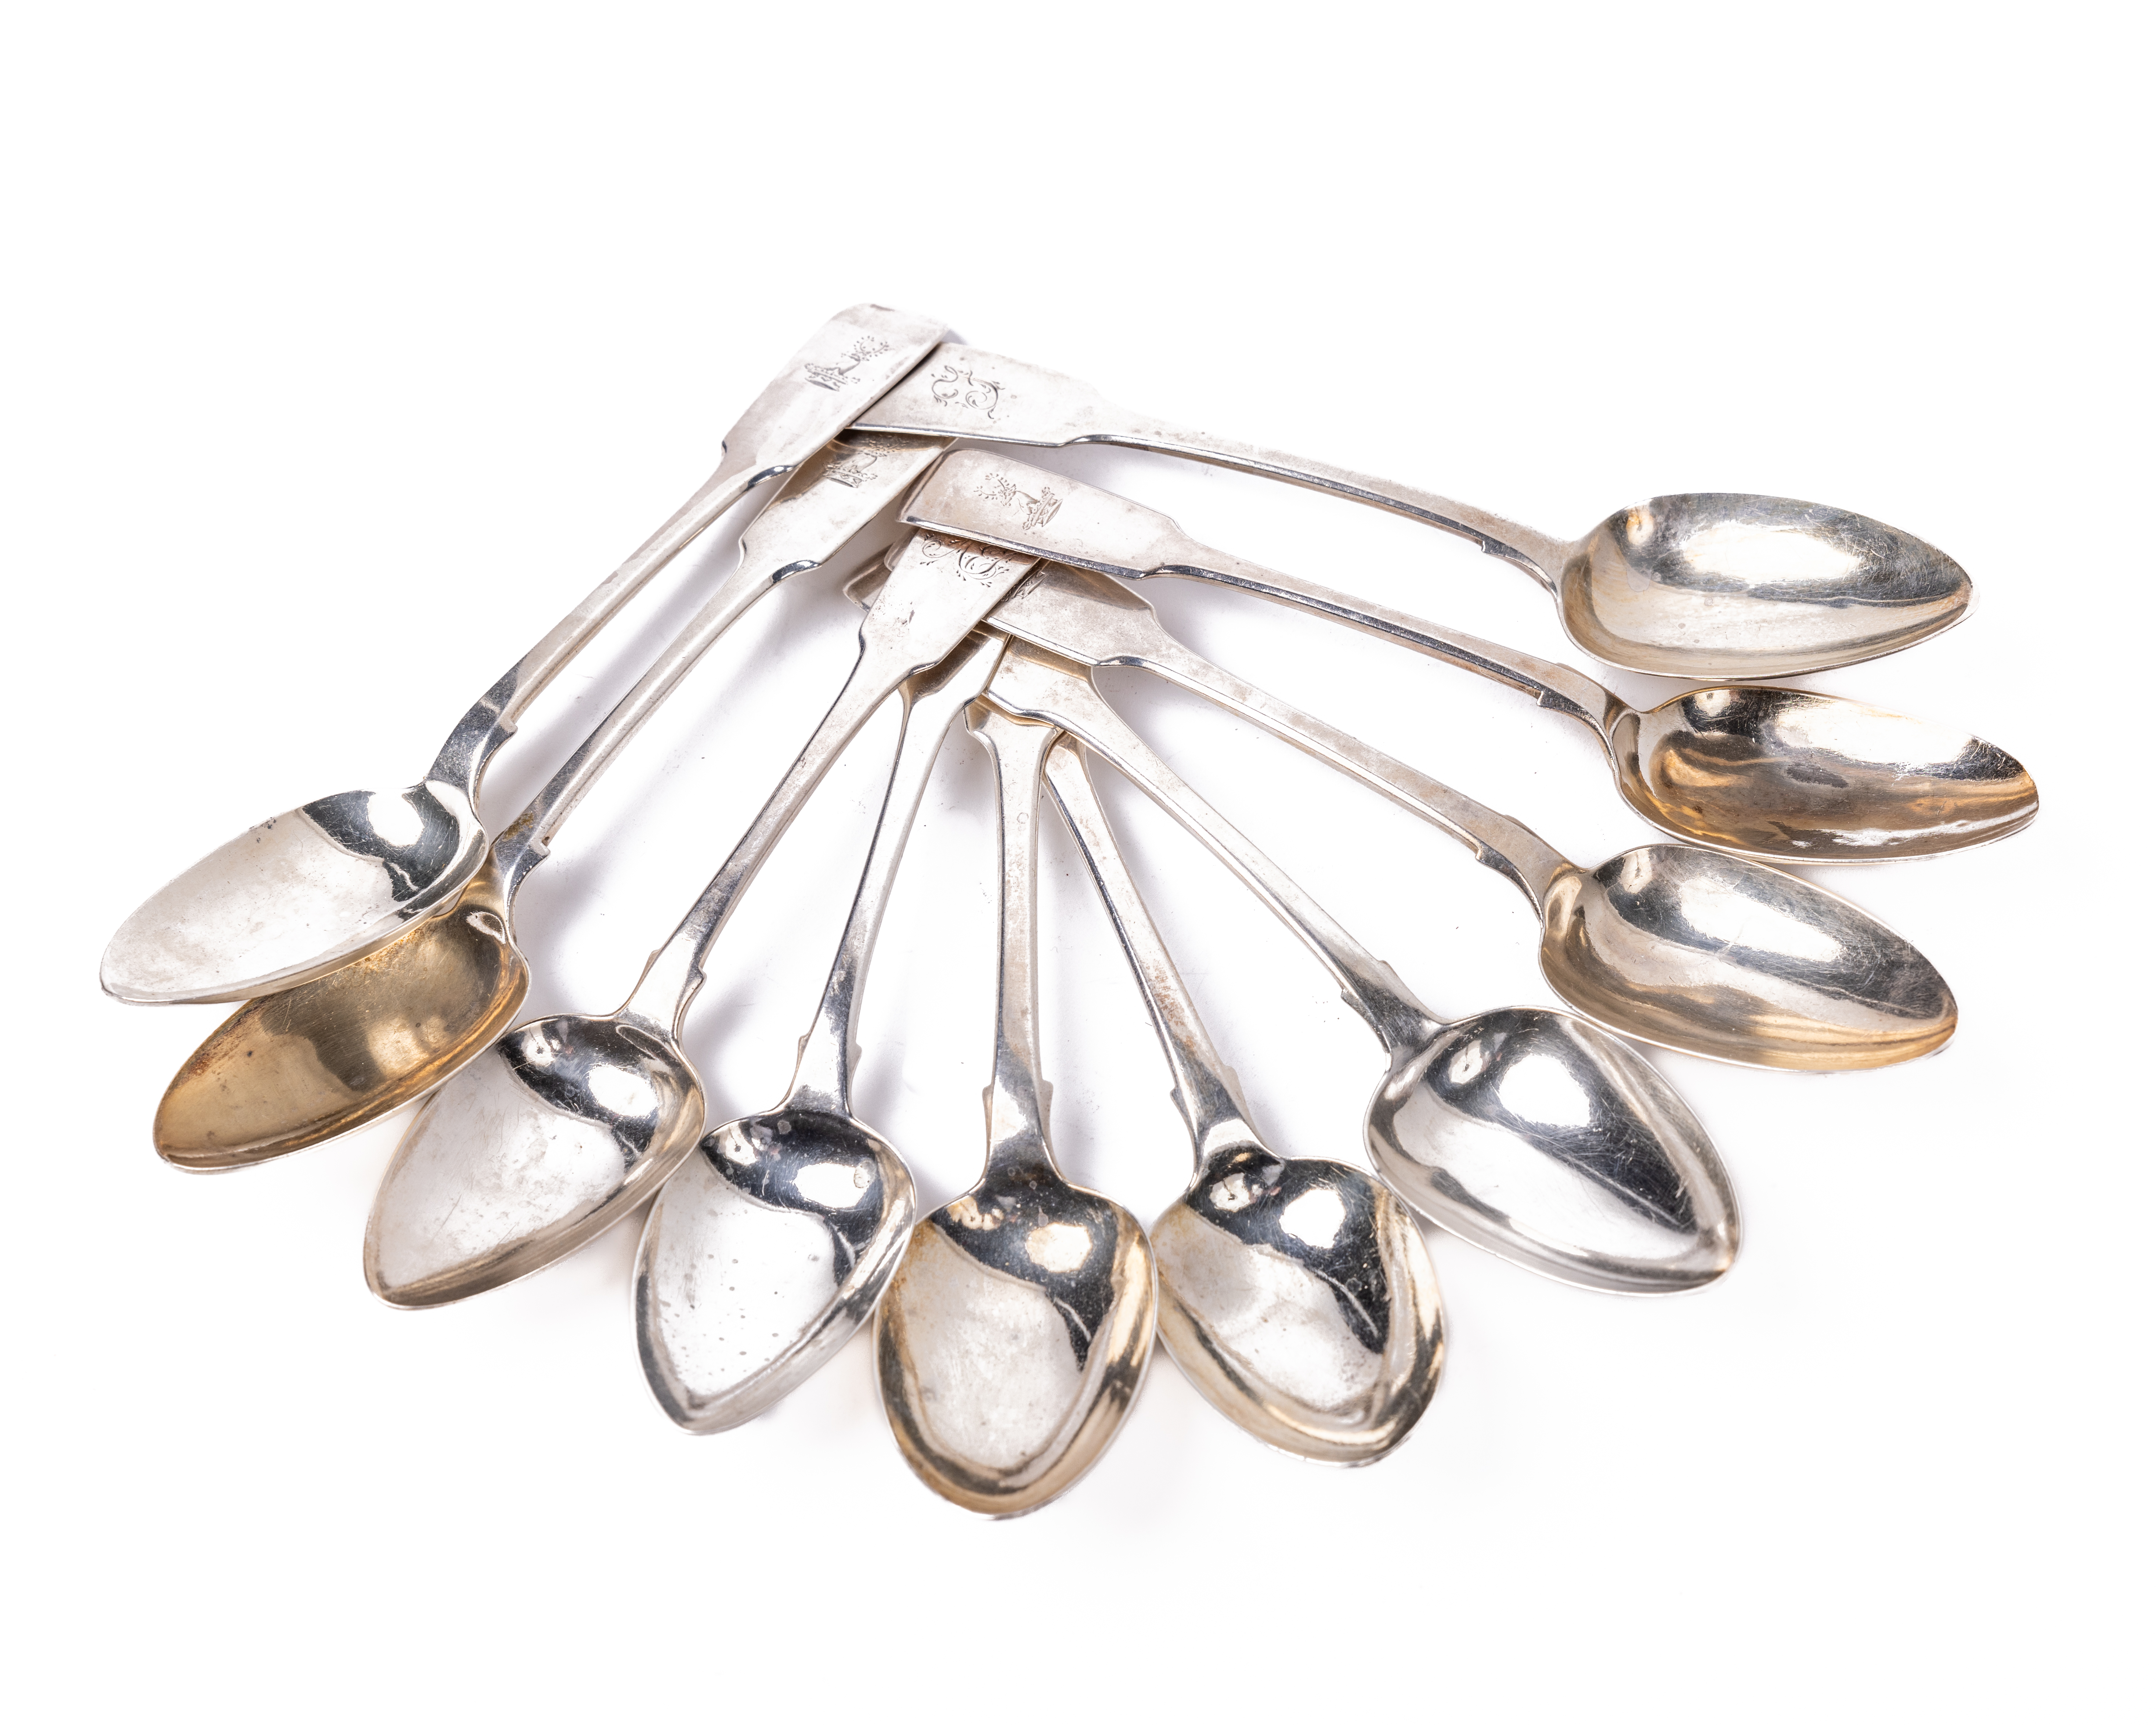 A set of 10 varied Irish silver fiddle pattern and rat-tail design Dessert Spoons (6 + 2 + 2),